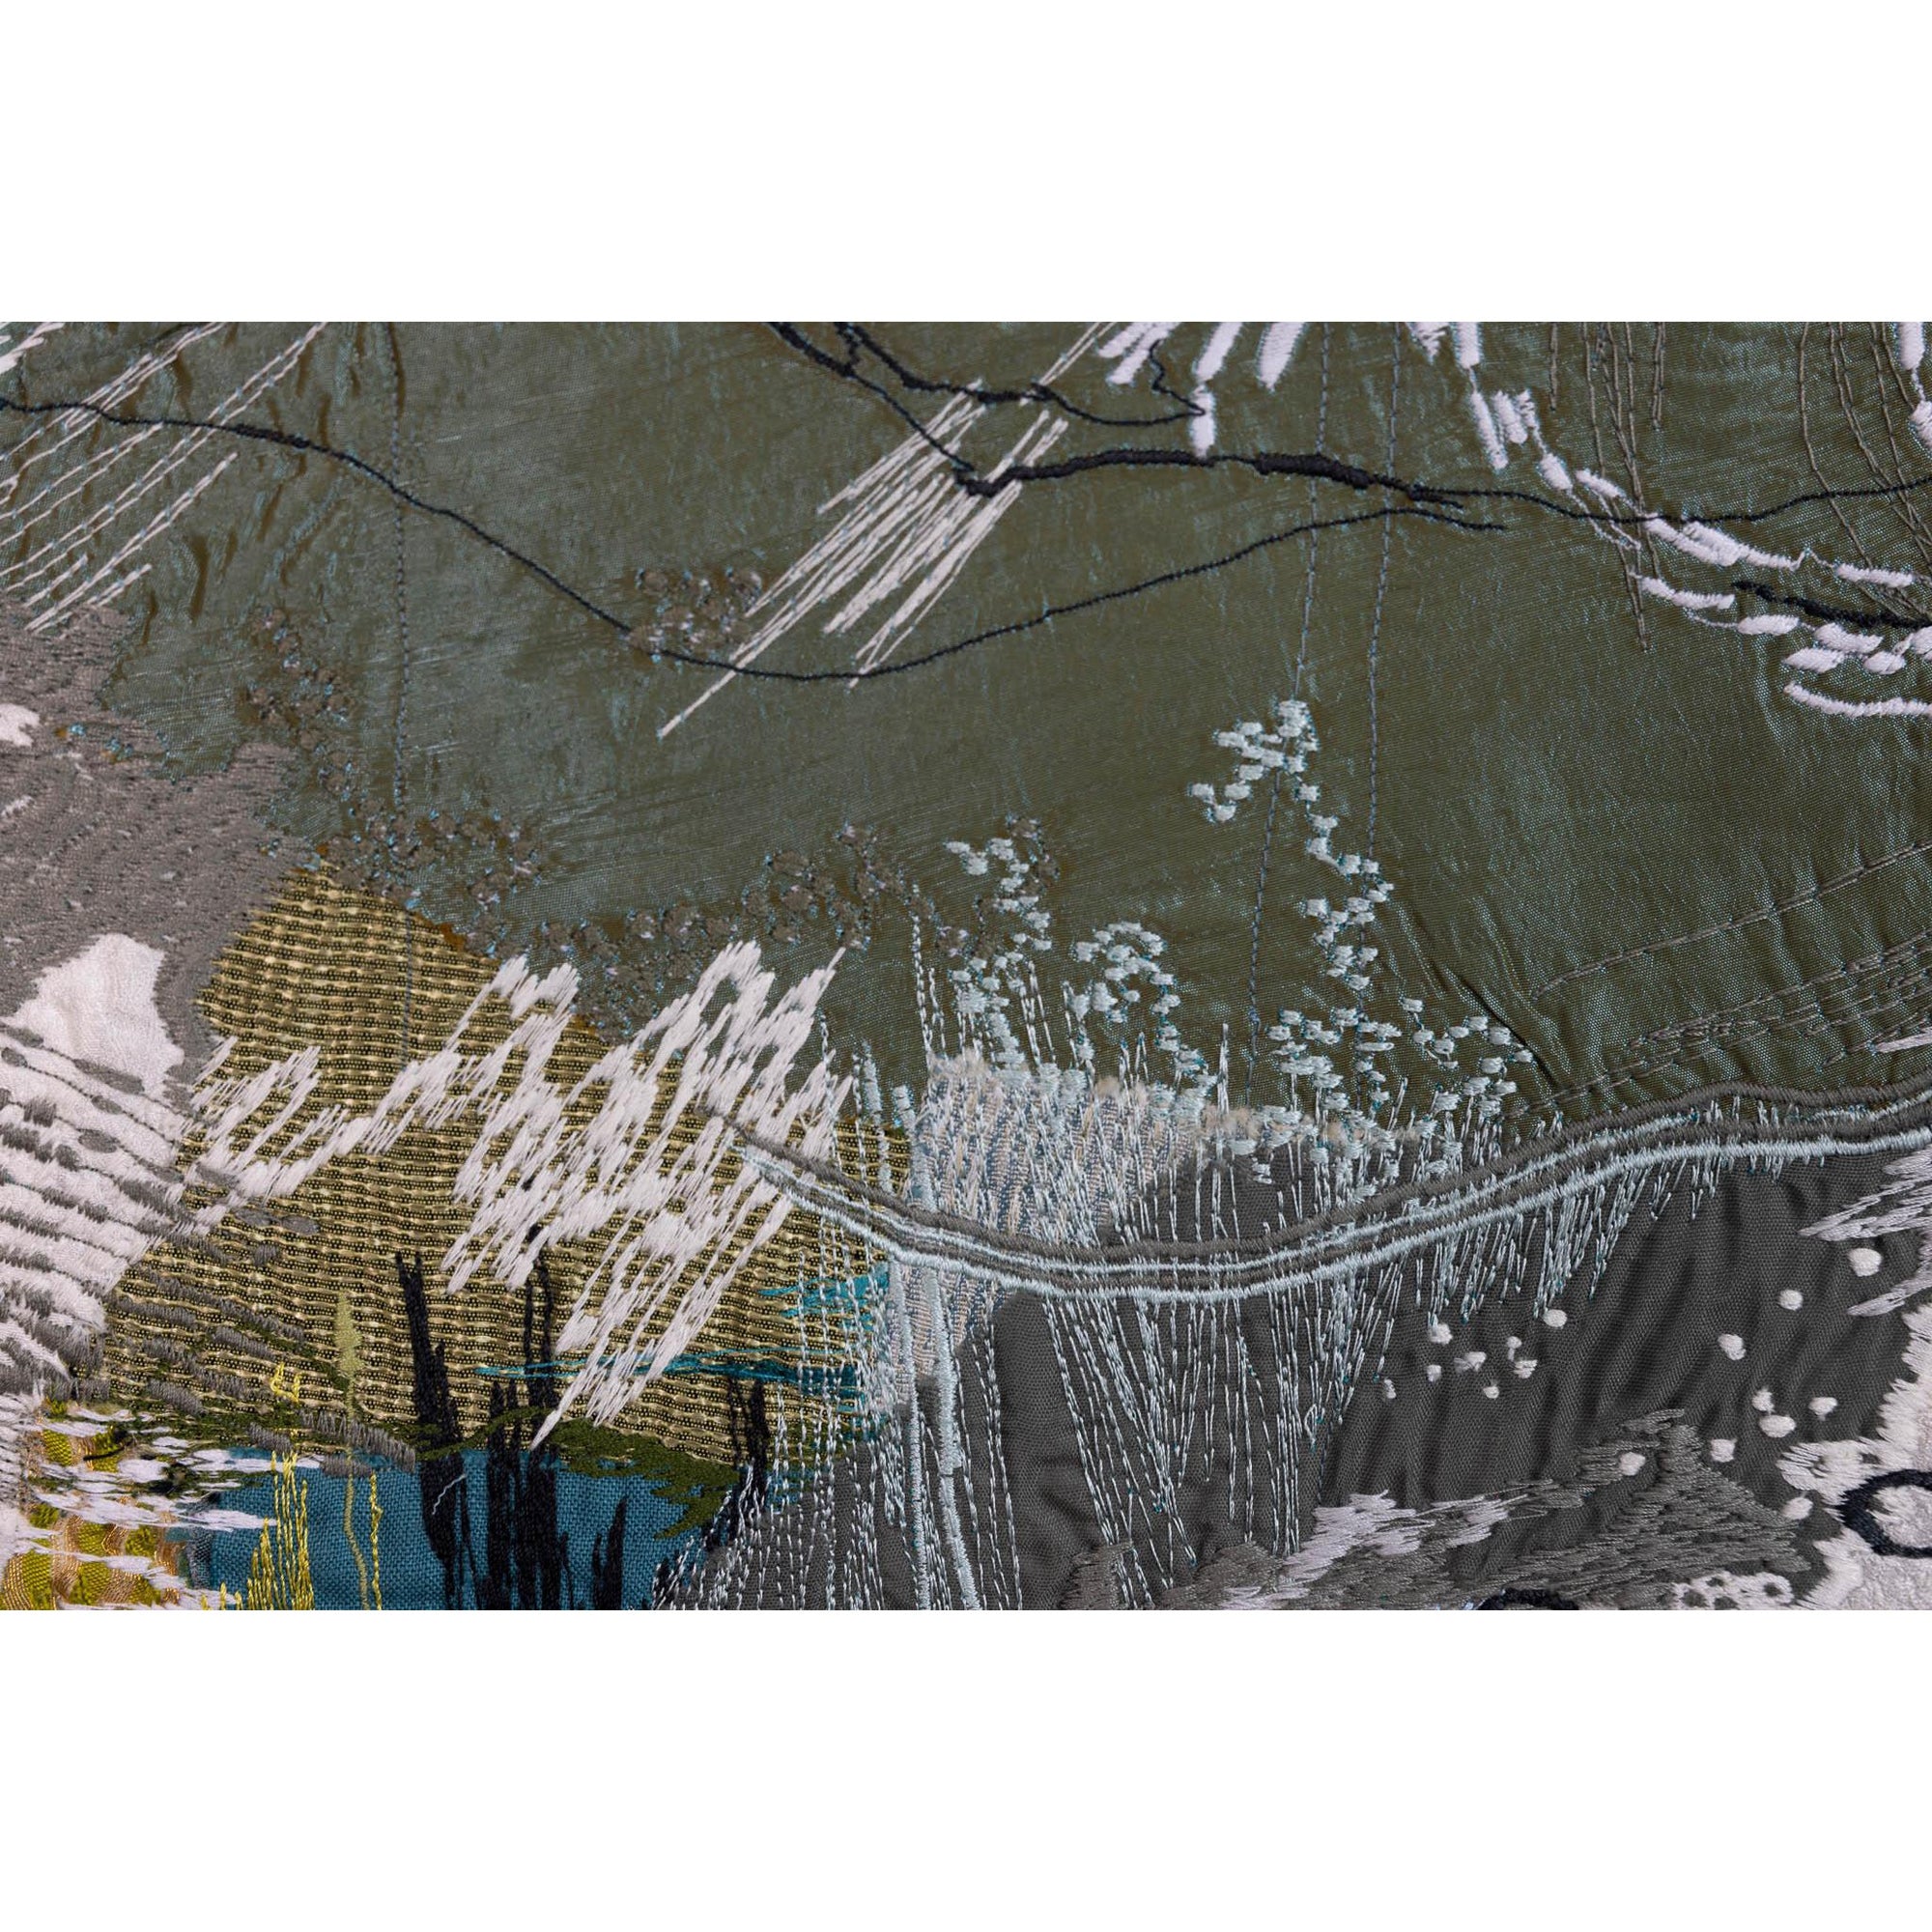 'Estuary' dynamic stitched textiles by Sarah Pooley, available at Padstow Gallery, Cornwall